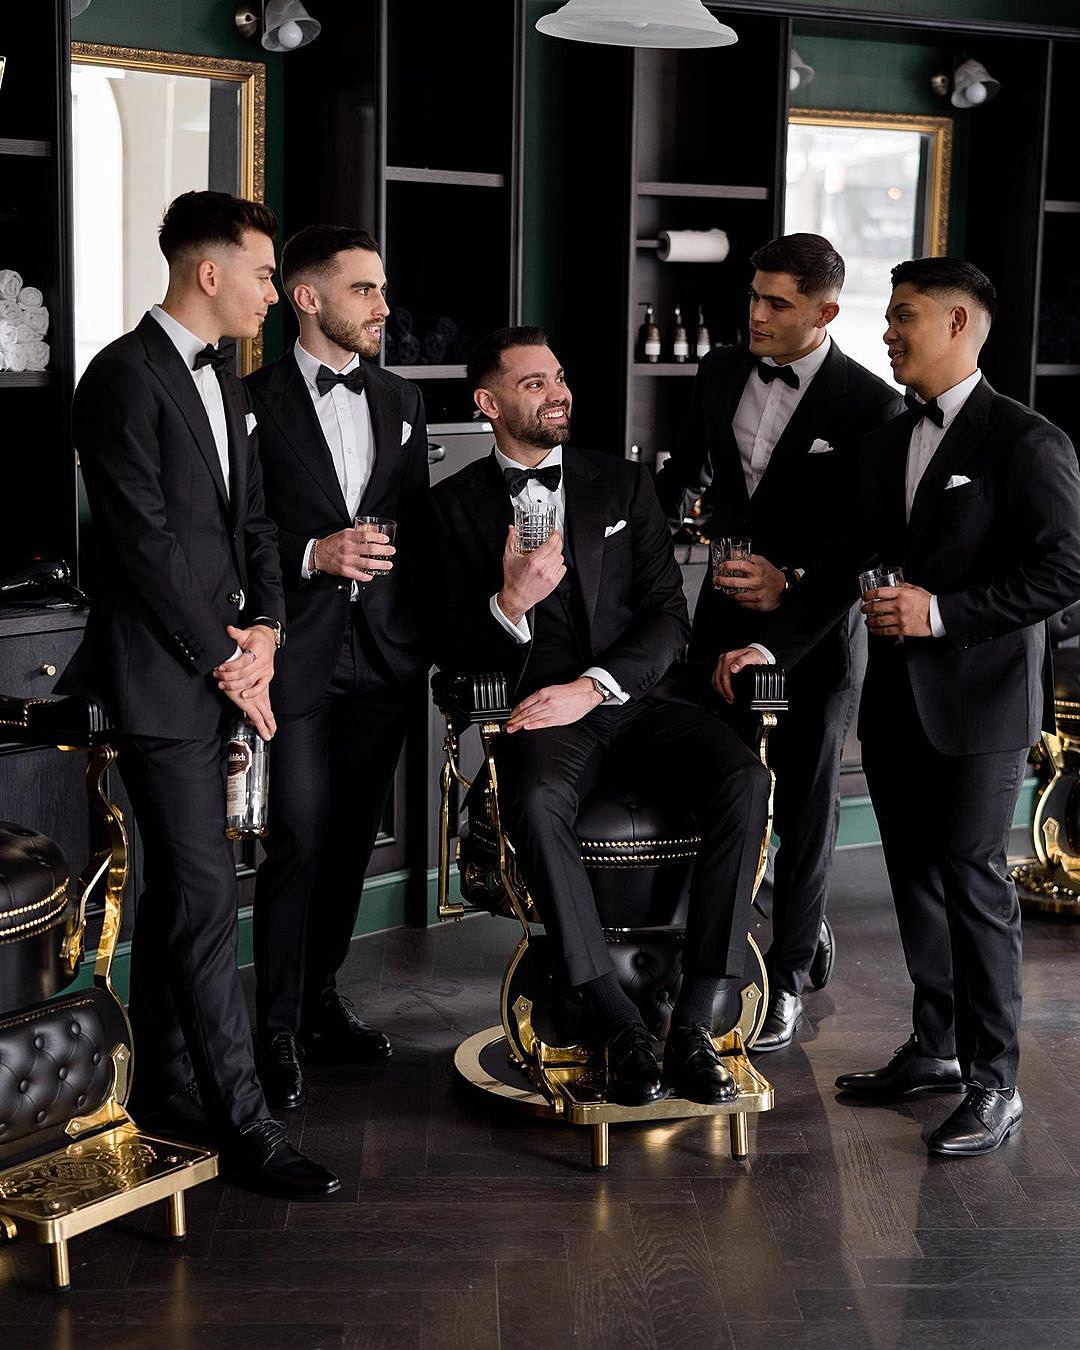 wedding trends groomsmen outfit trends-classic suits